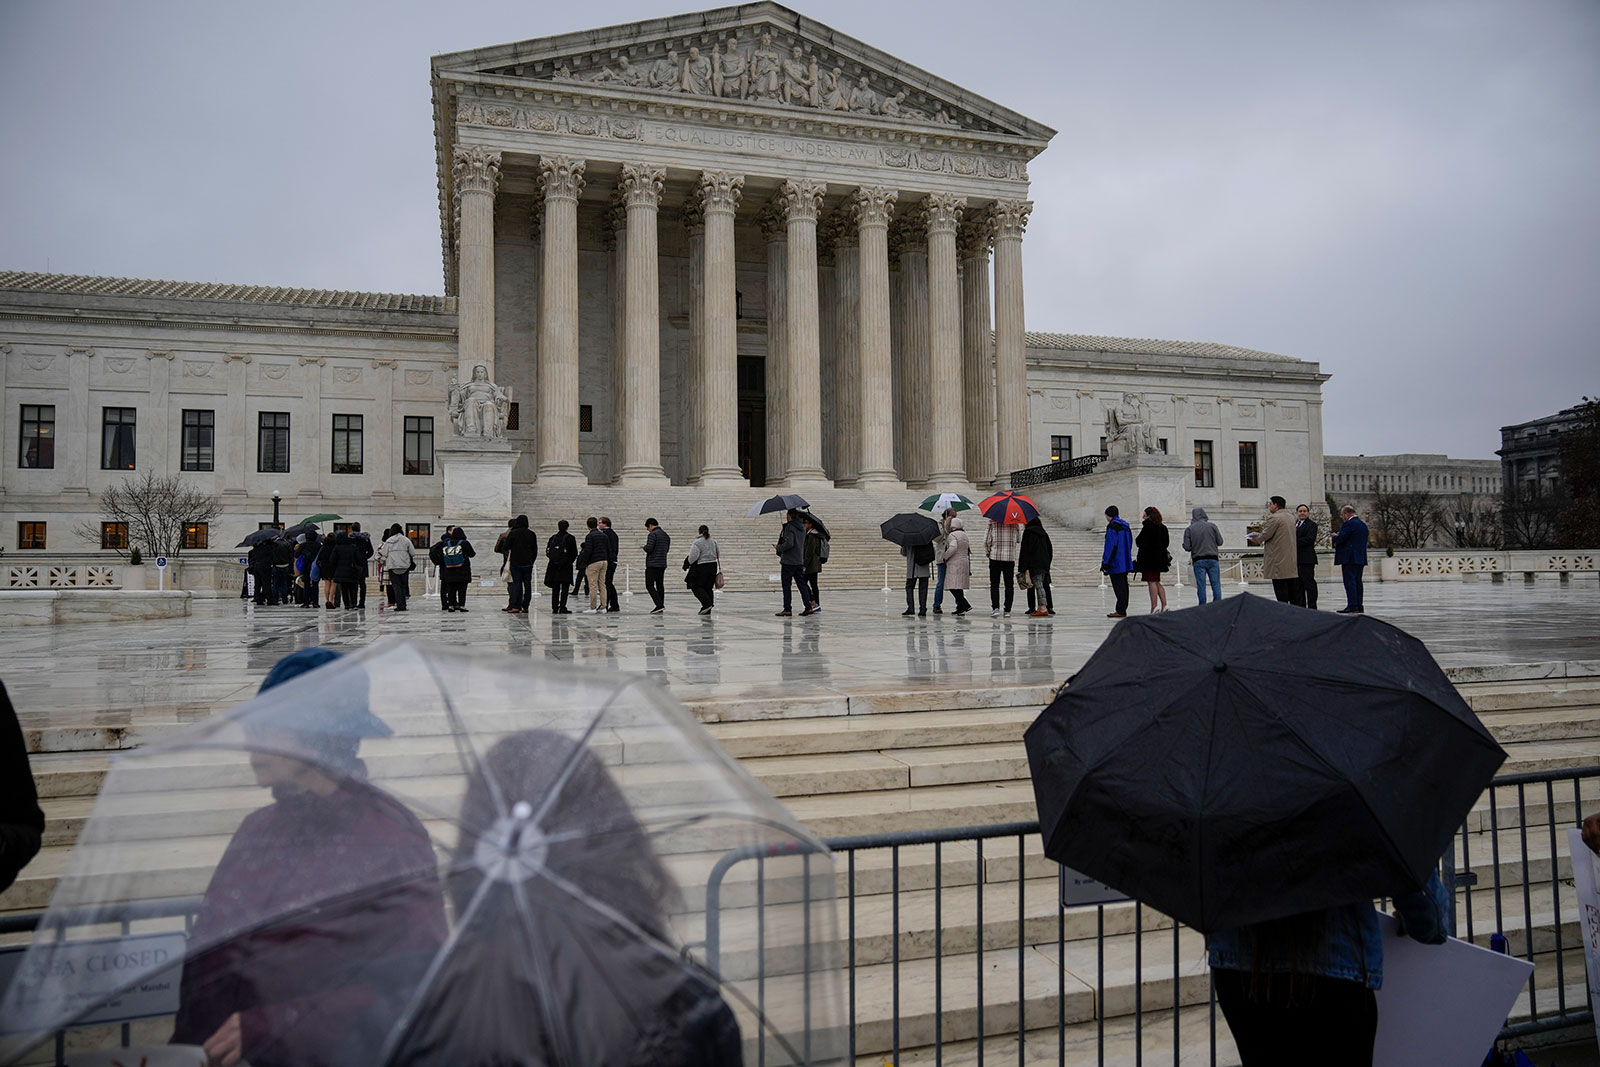 People wait in line outside the US Supreme Court to hear oral arguments in the Moore v. Harper case on December 7.